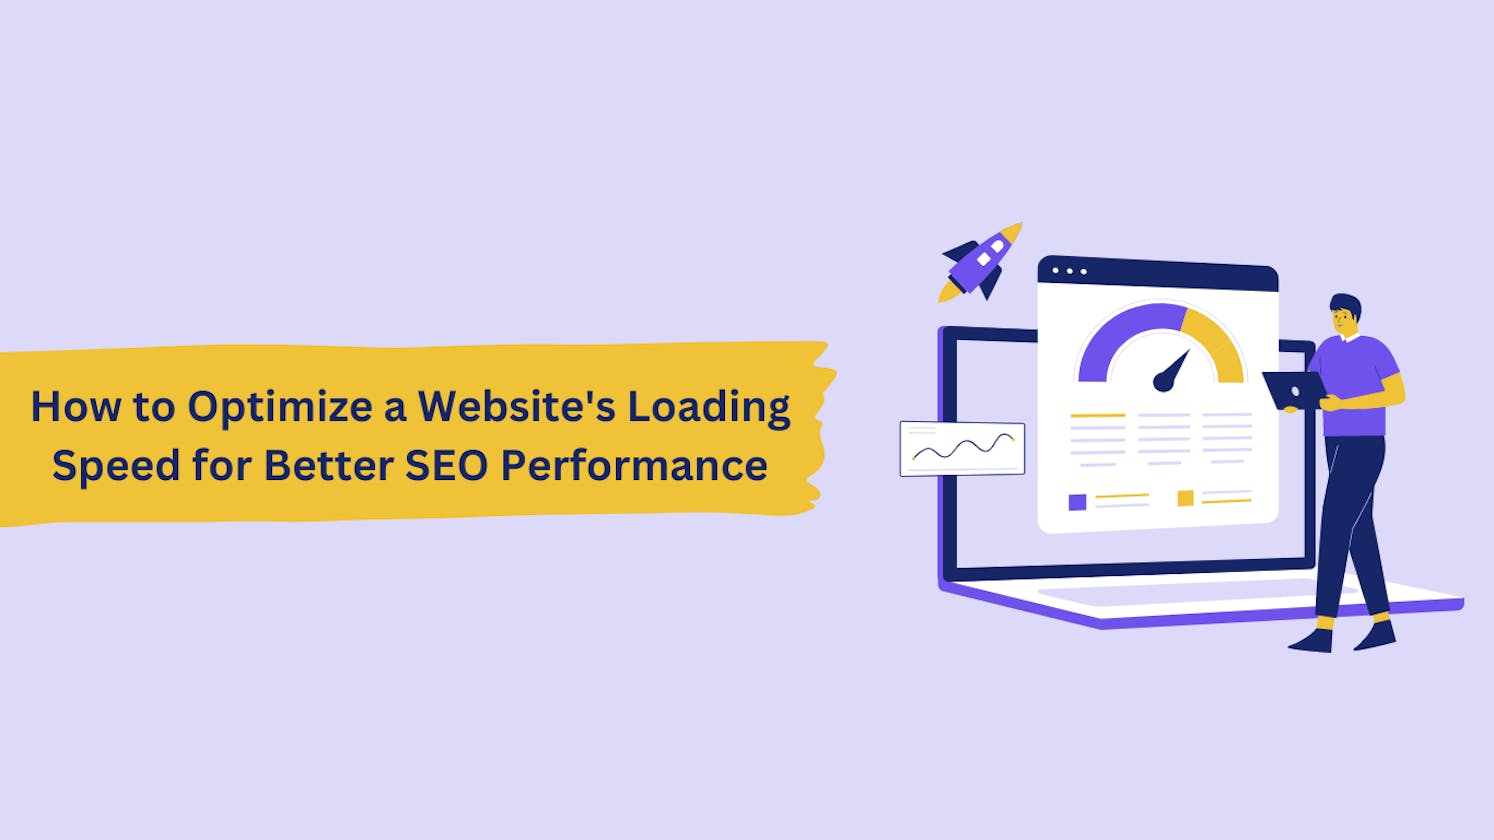 How to Optimize a Website's Loading Speed for Better SEO Performance?